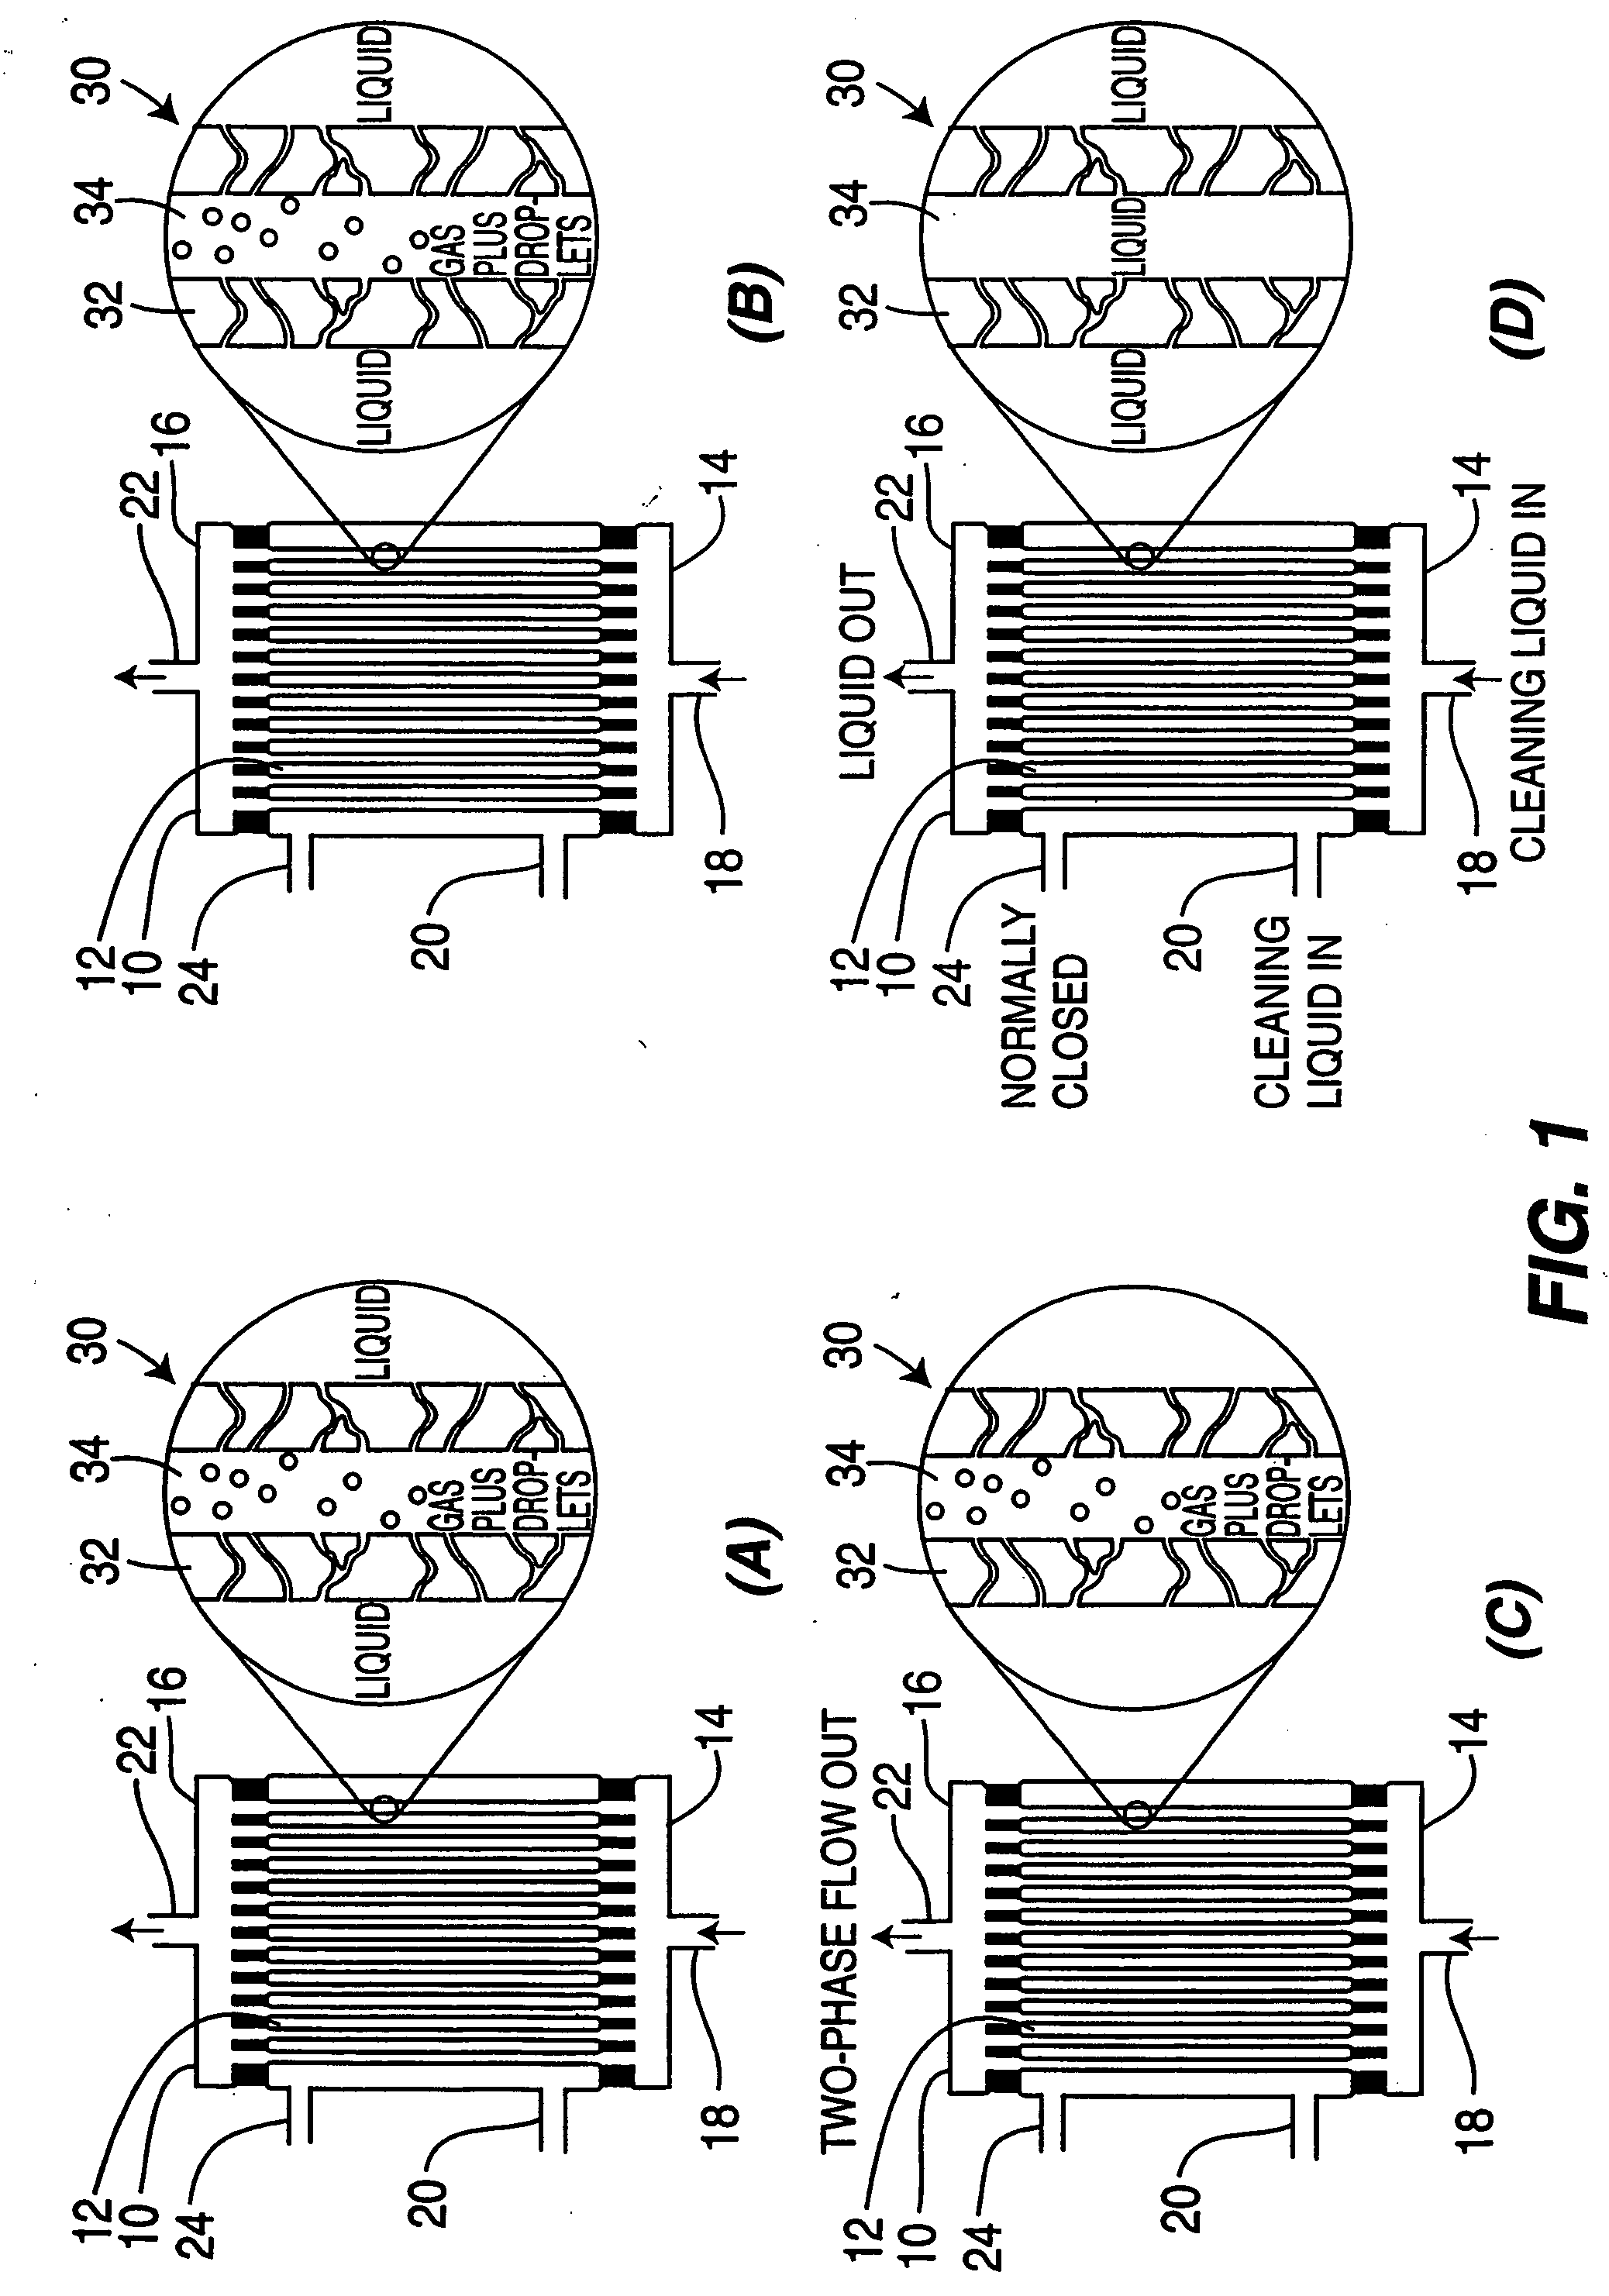 Method for cleaning hollow tubing and fibers